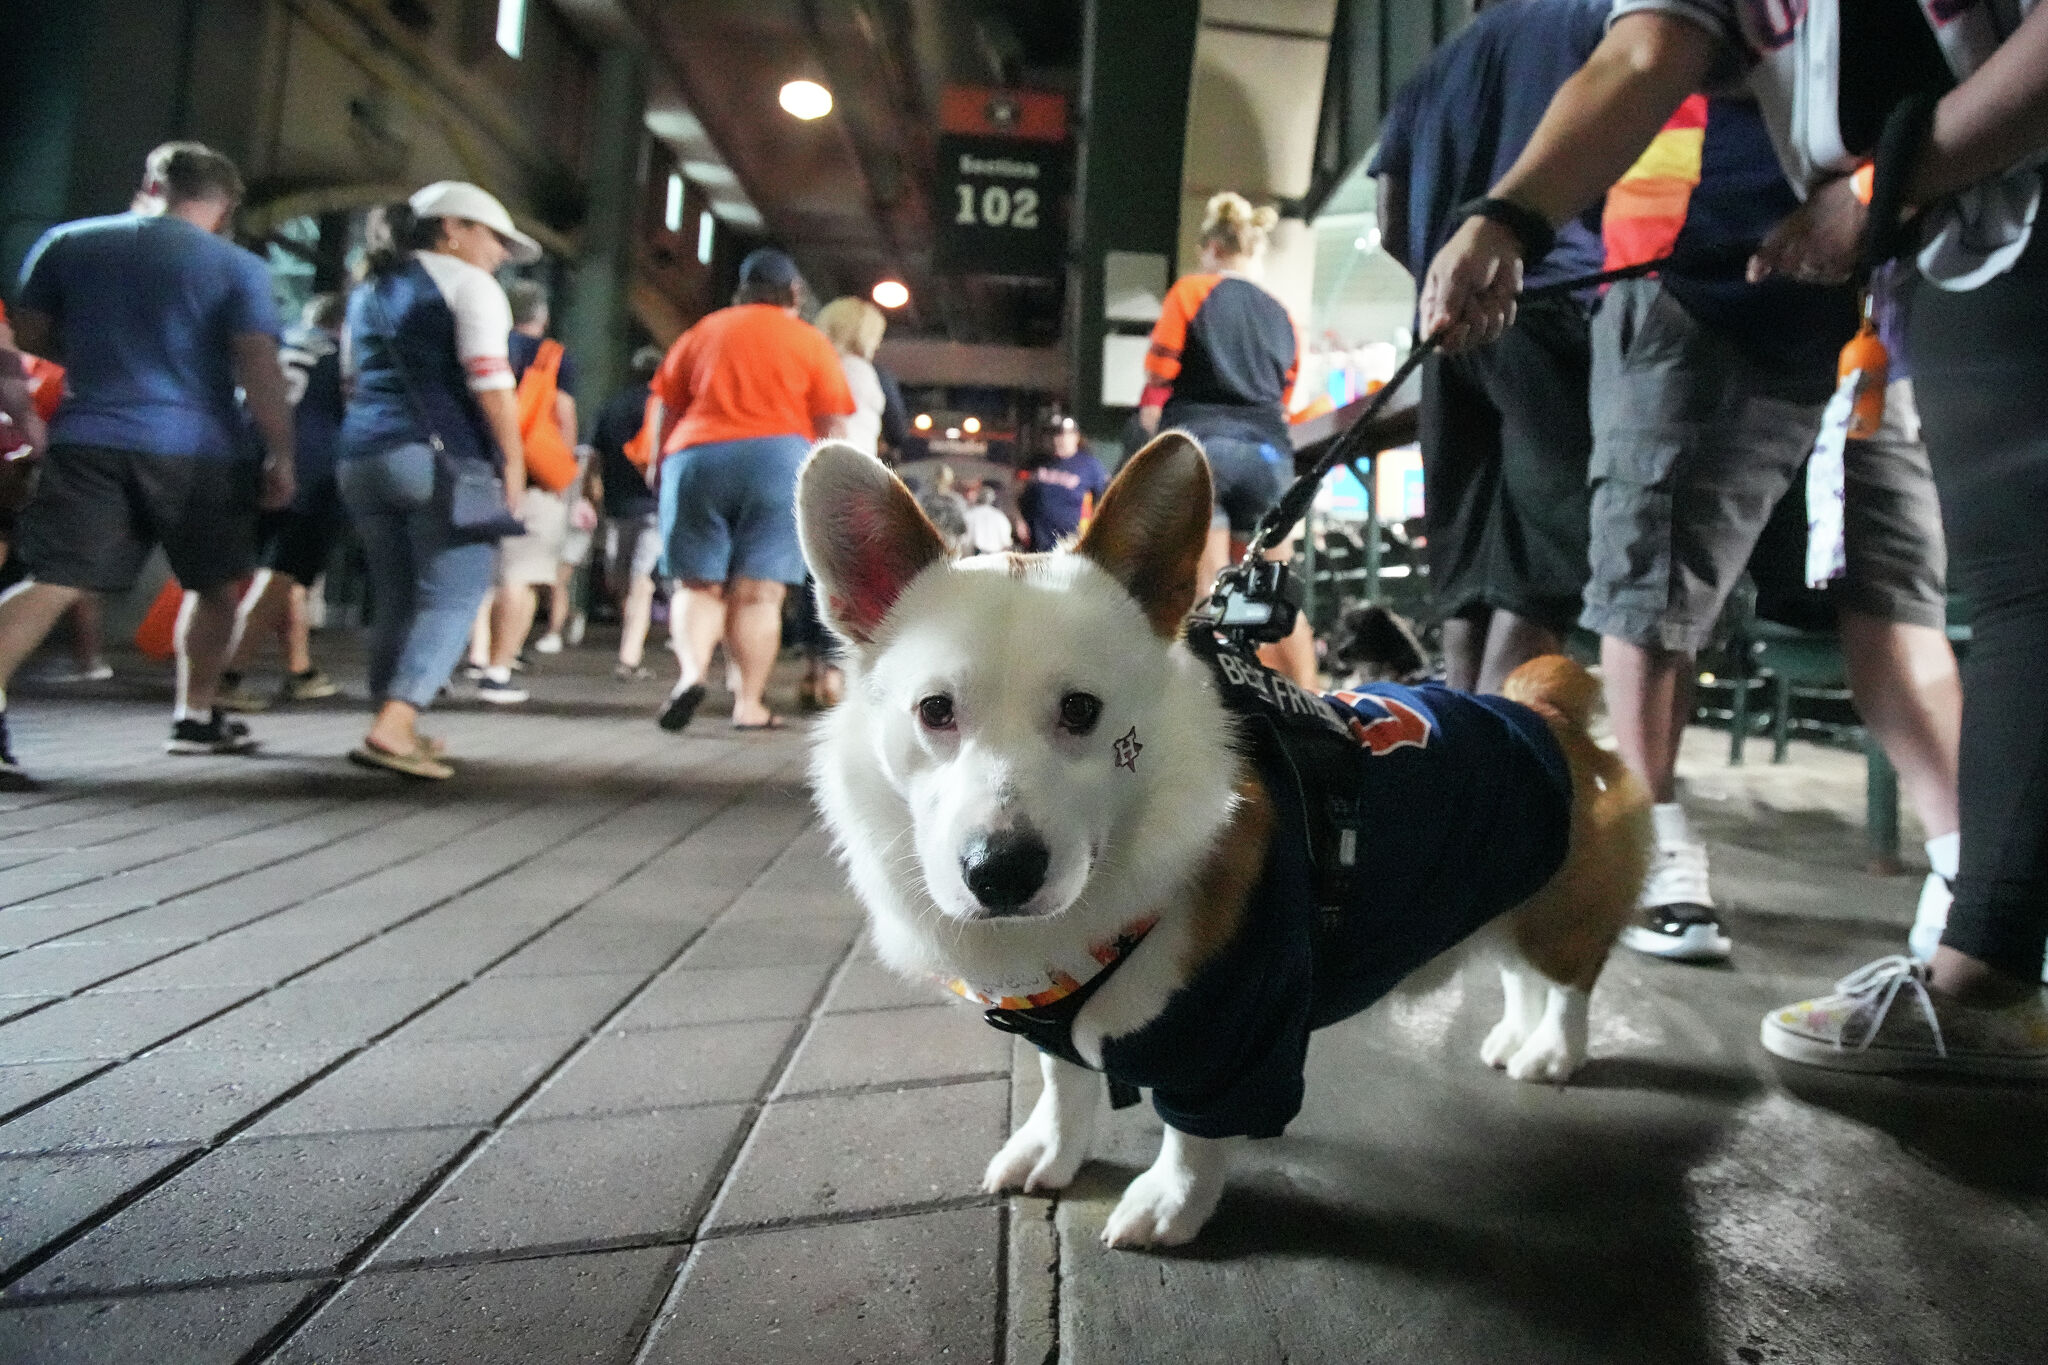 Dogs wait to enter the ball park for Astros Dog Day at Minute Maid